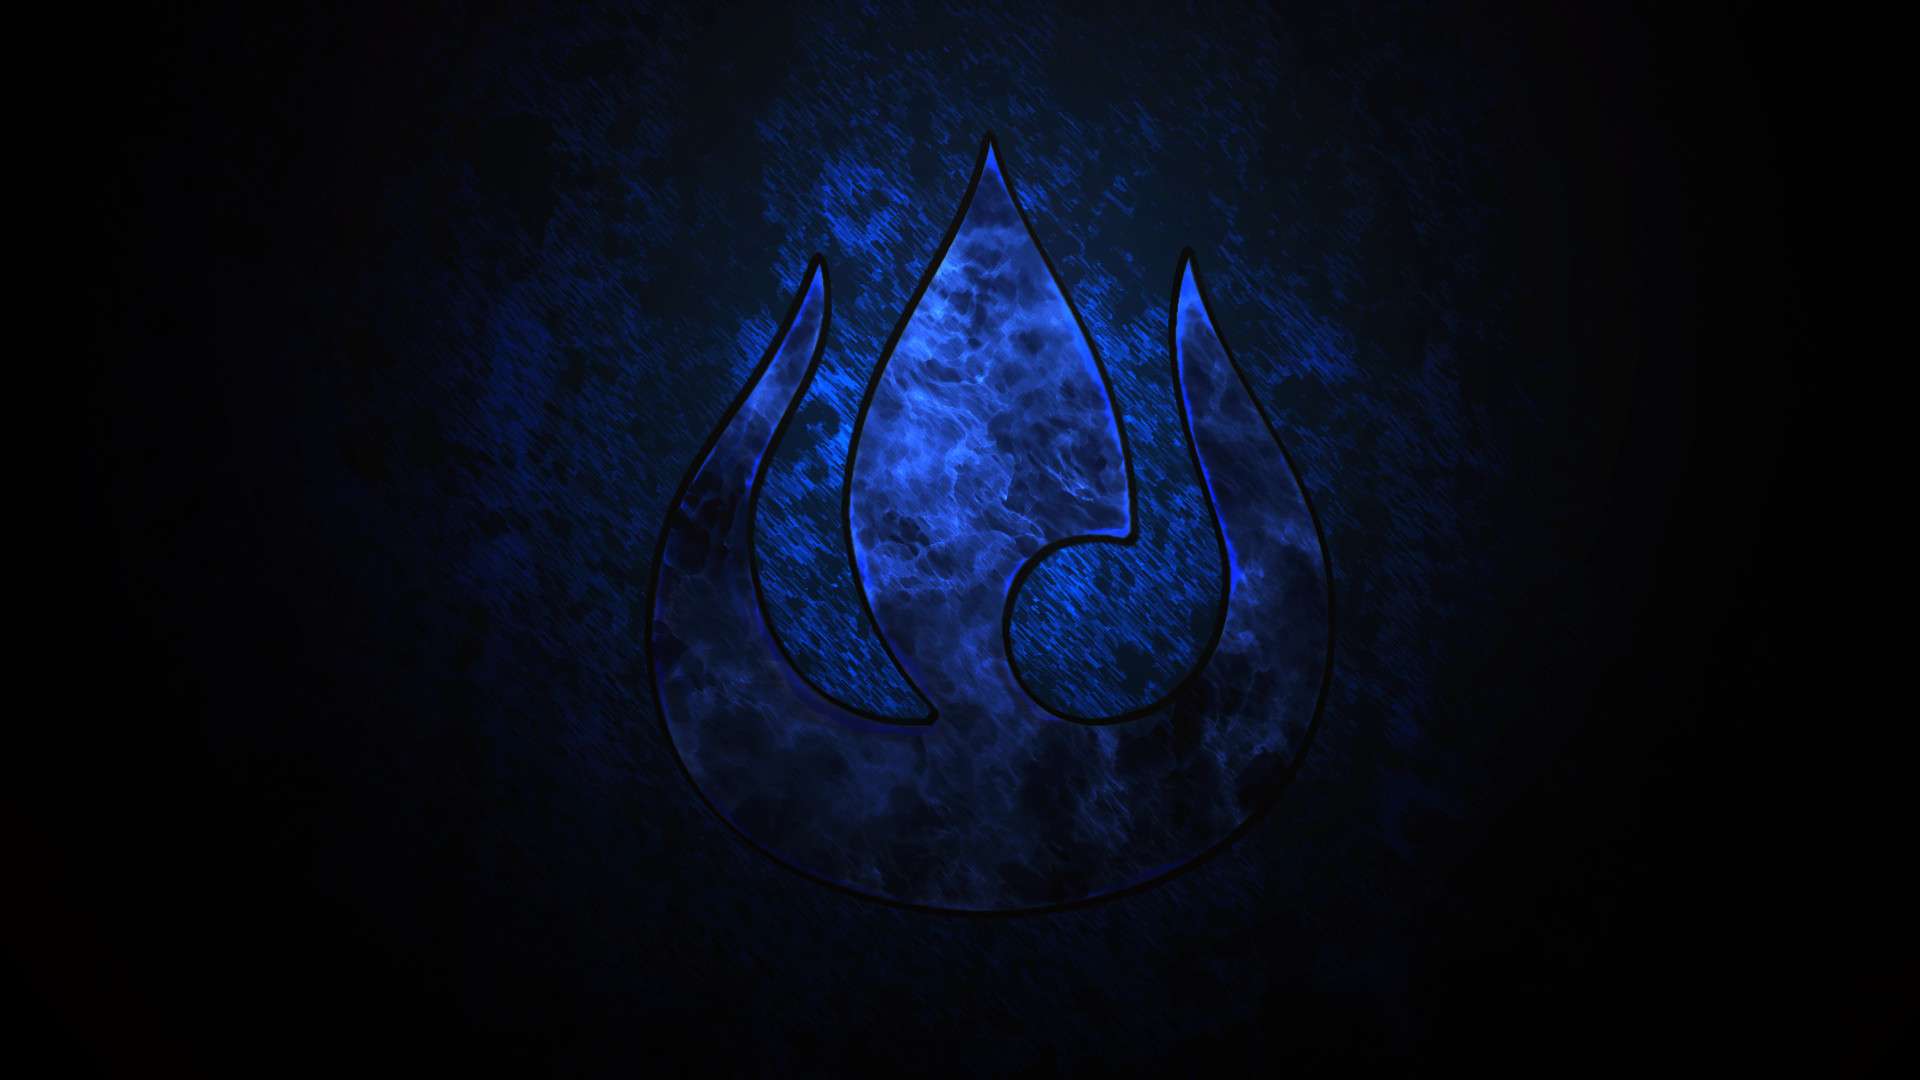 Blue Fire Nation by BL00DYP1R4T3 Blue Fire Nation by BL00DYP1R4T3